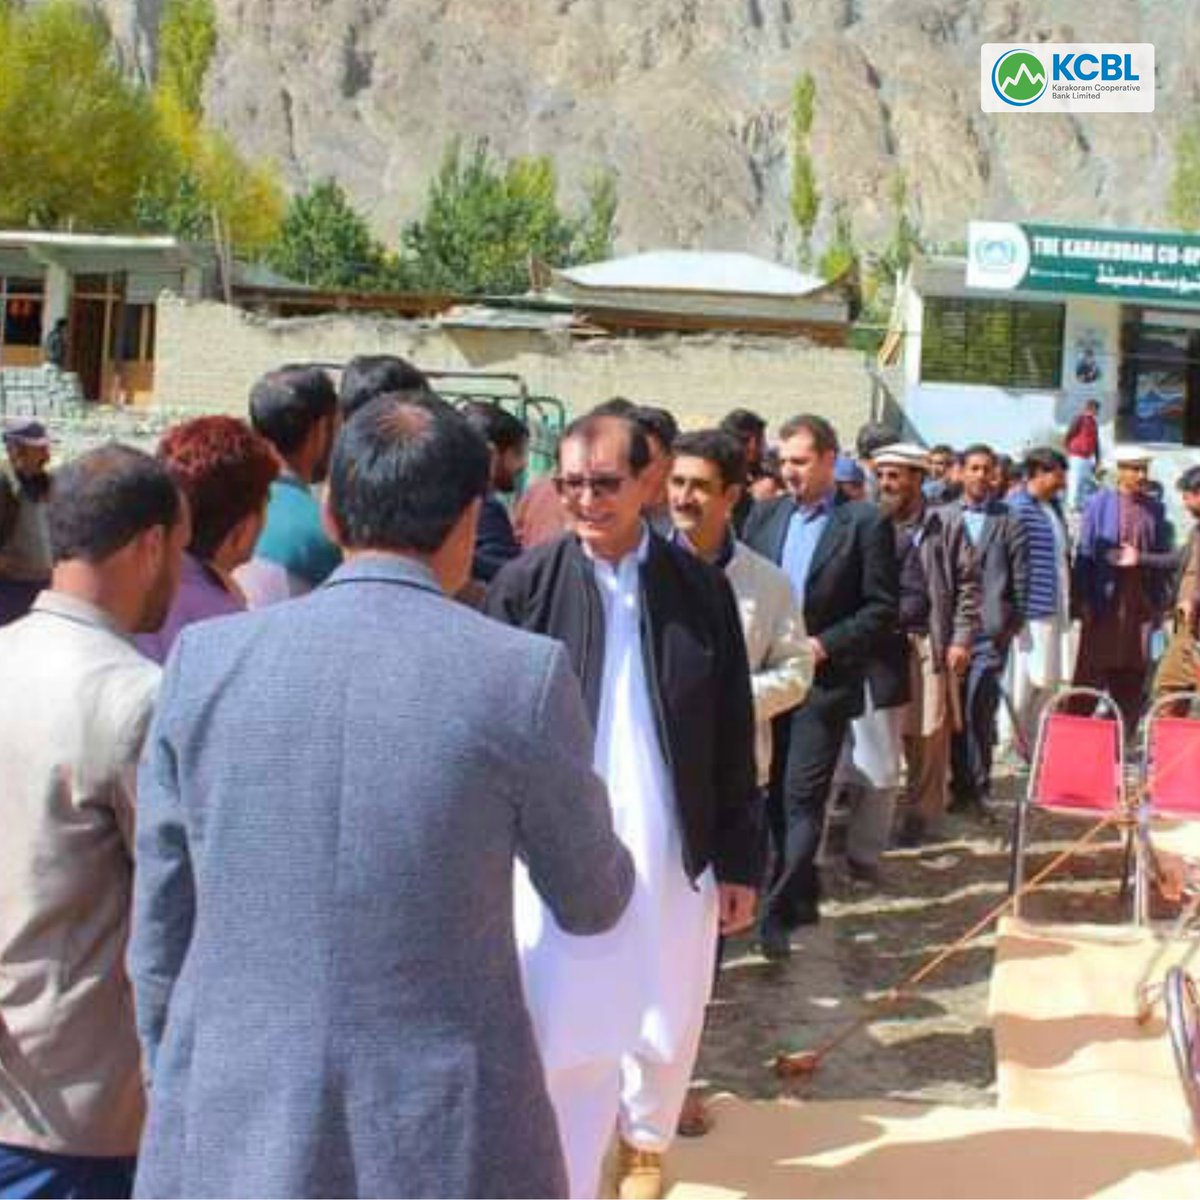 KCBL's Hundur Branch in Yasin, 
 It's a historic moment as our first female branch manager takes charge, marking a significant step towards progress in Hundur Yasin.
#KCBL #thebankofgb #kcblsupport #banksingb #kcblschemes #banking #financingoptions #entrepreneurlife